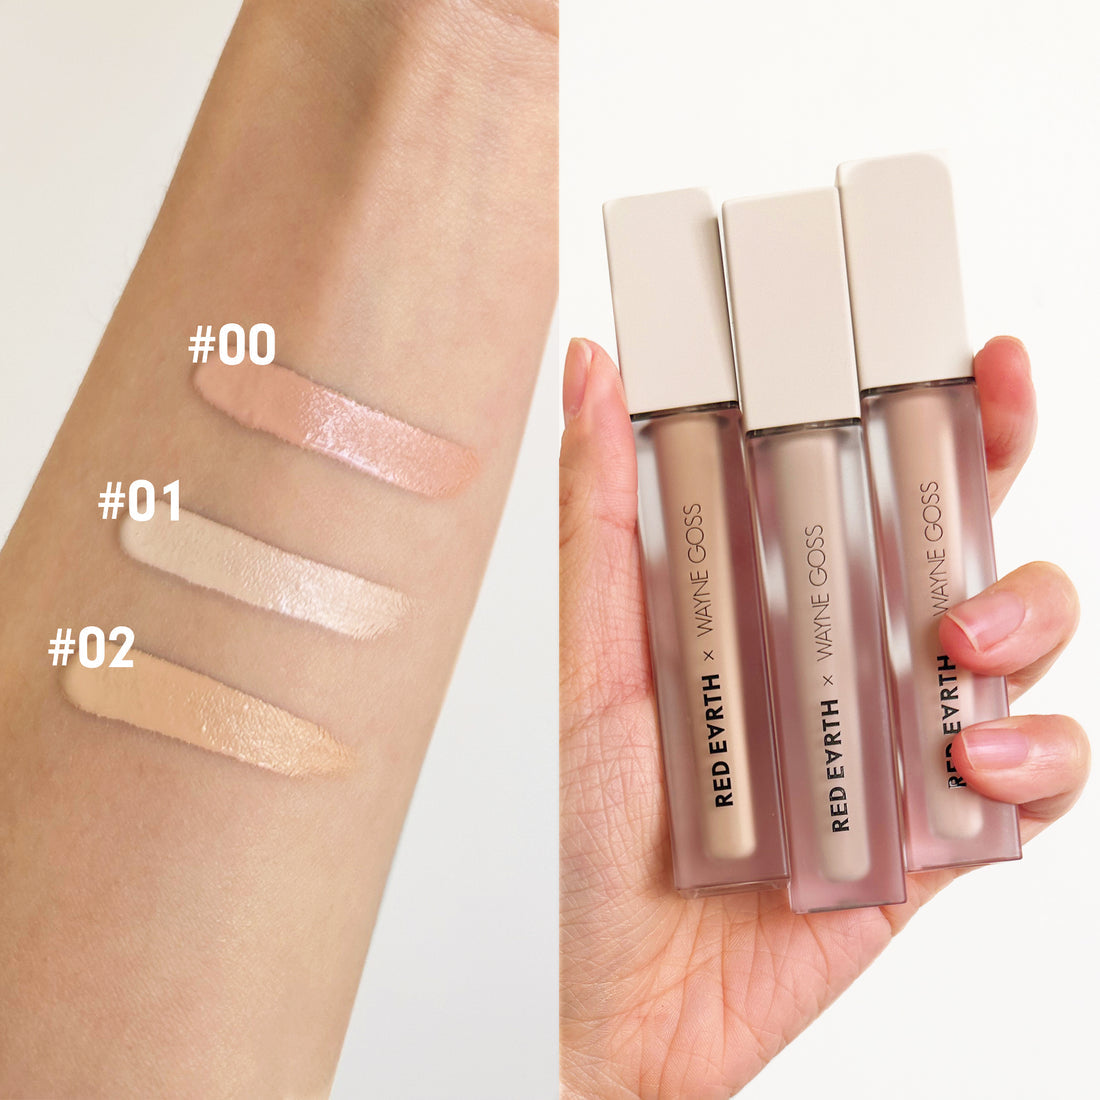 Red Earth Nude Wear Full Coverage Concealer